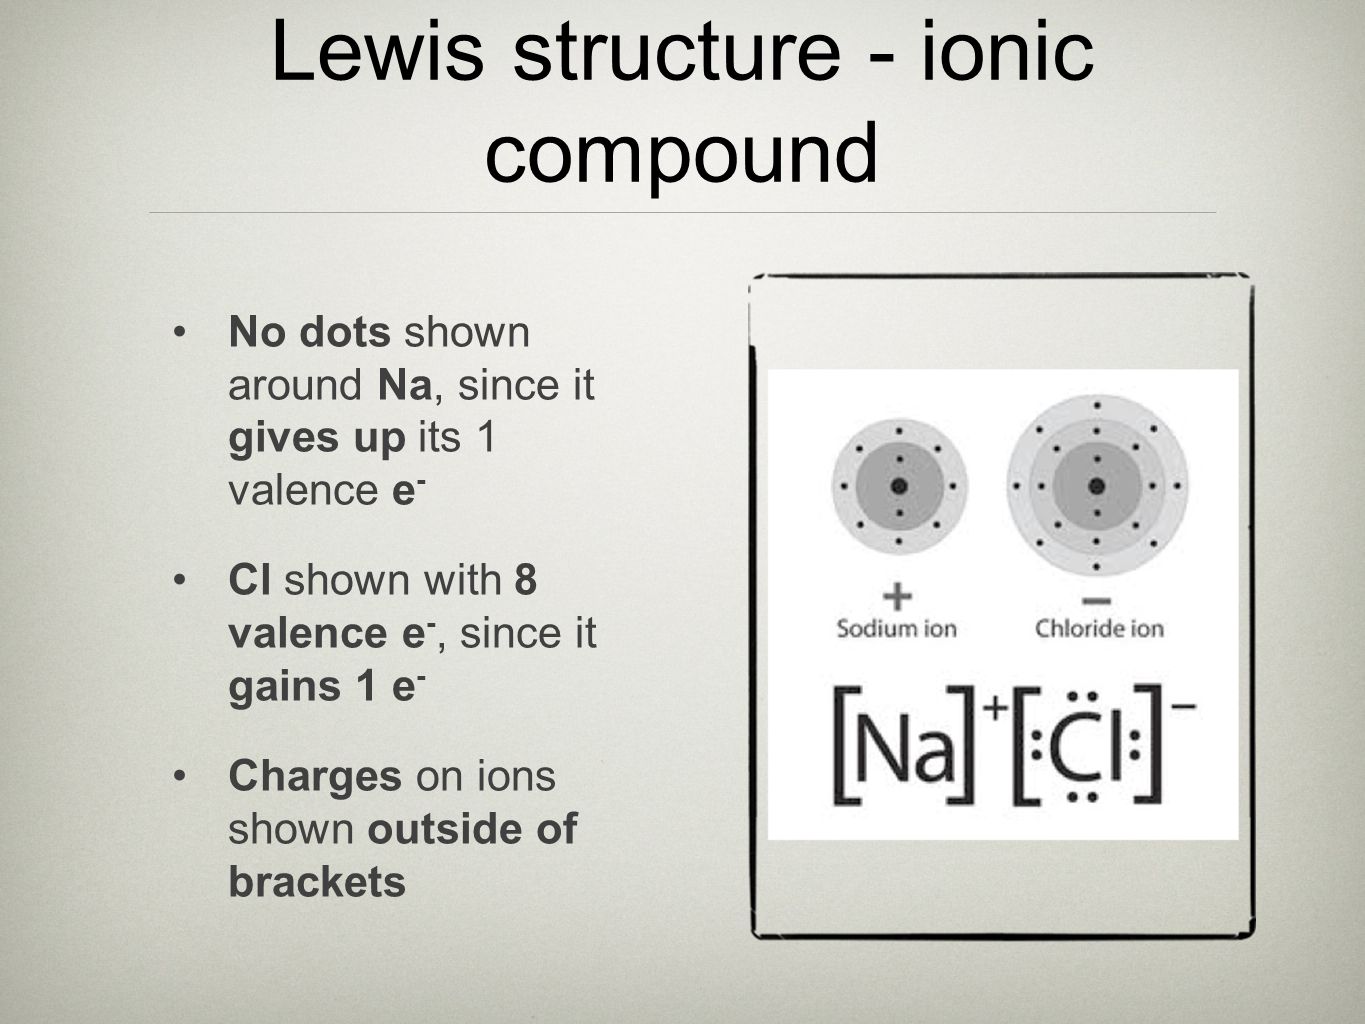 Lewis structure - ionic compound No dots shown around Na, since it gives up its 1 valence e - Cl shown with 8 valence e -, since it gains 1 e - Charges on ions shown outside of brackets